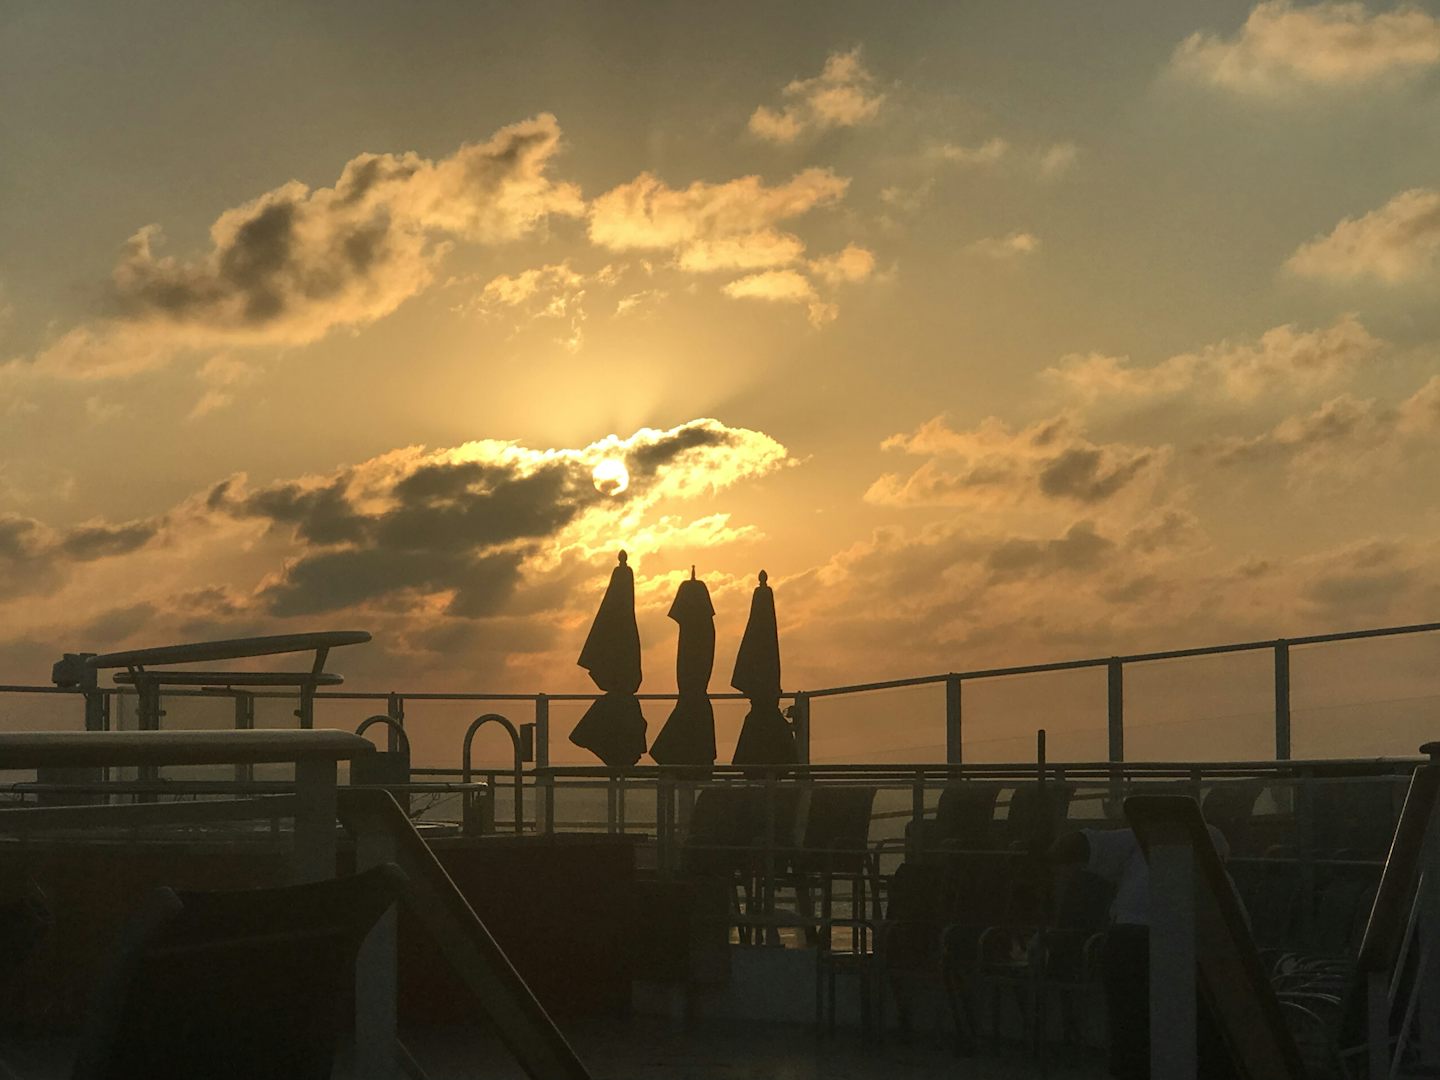 This was on the top deck of the ship at sunset.